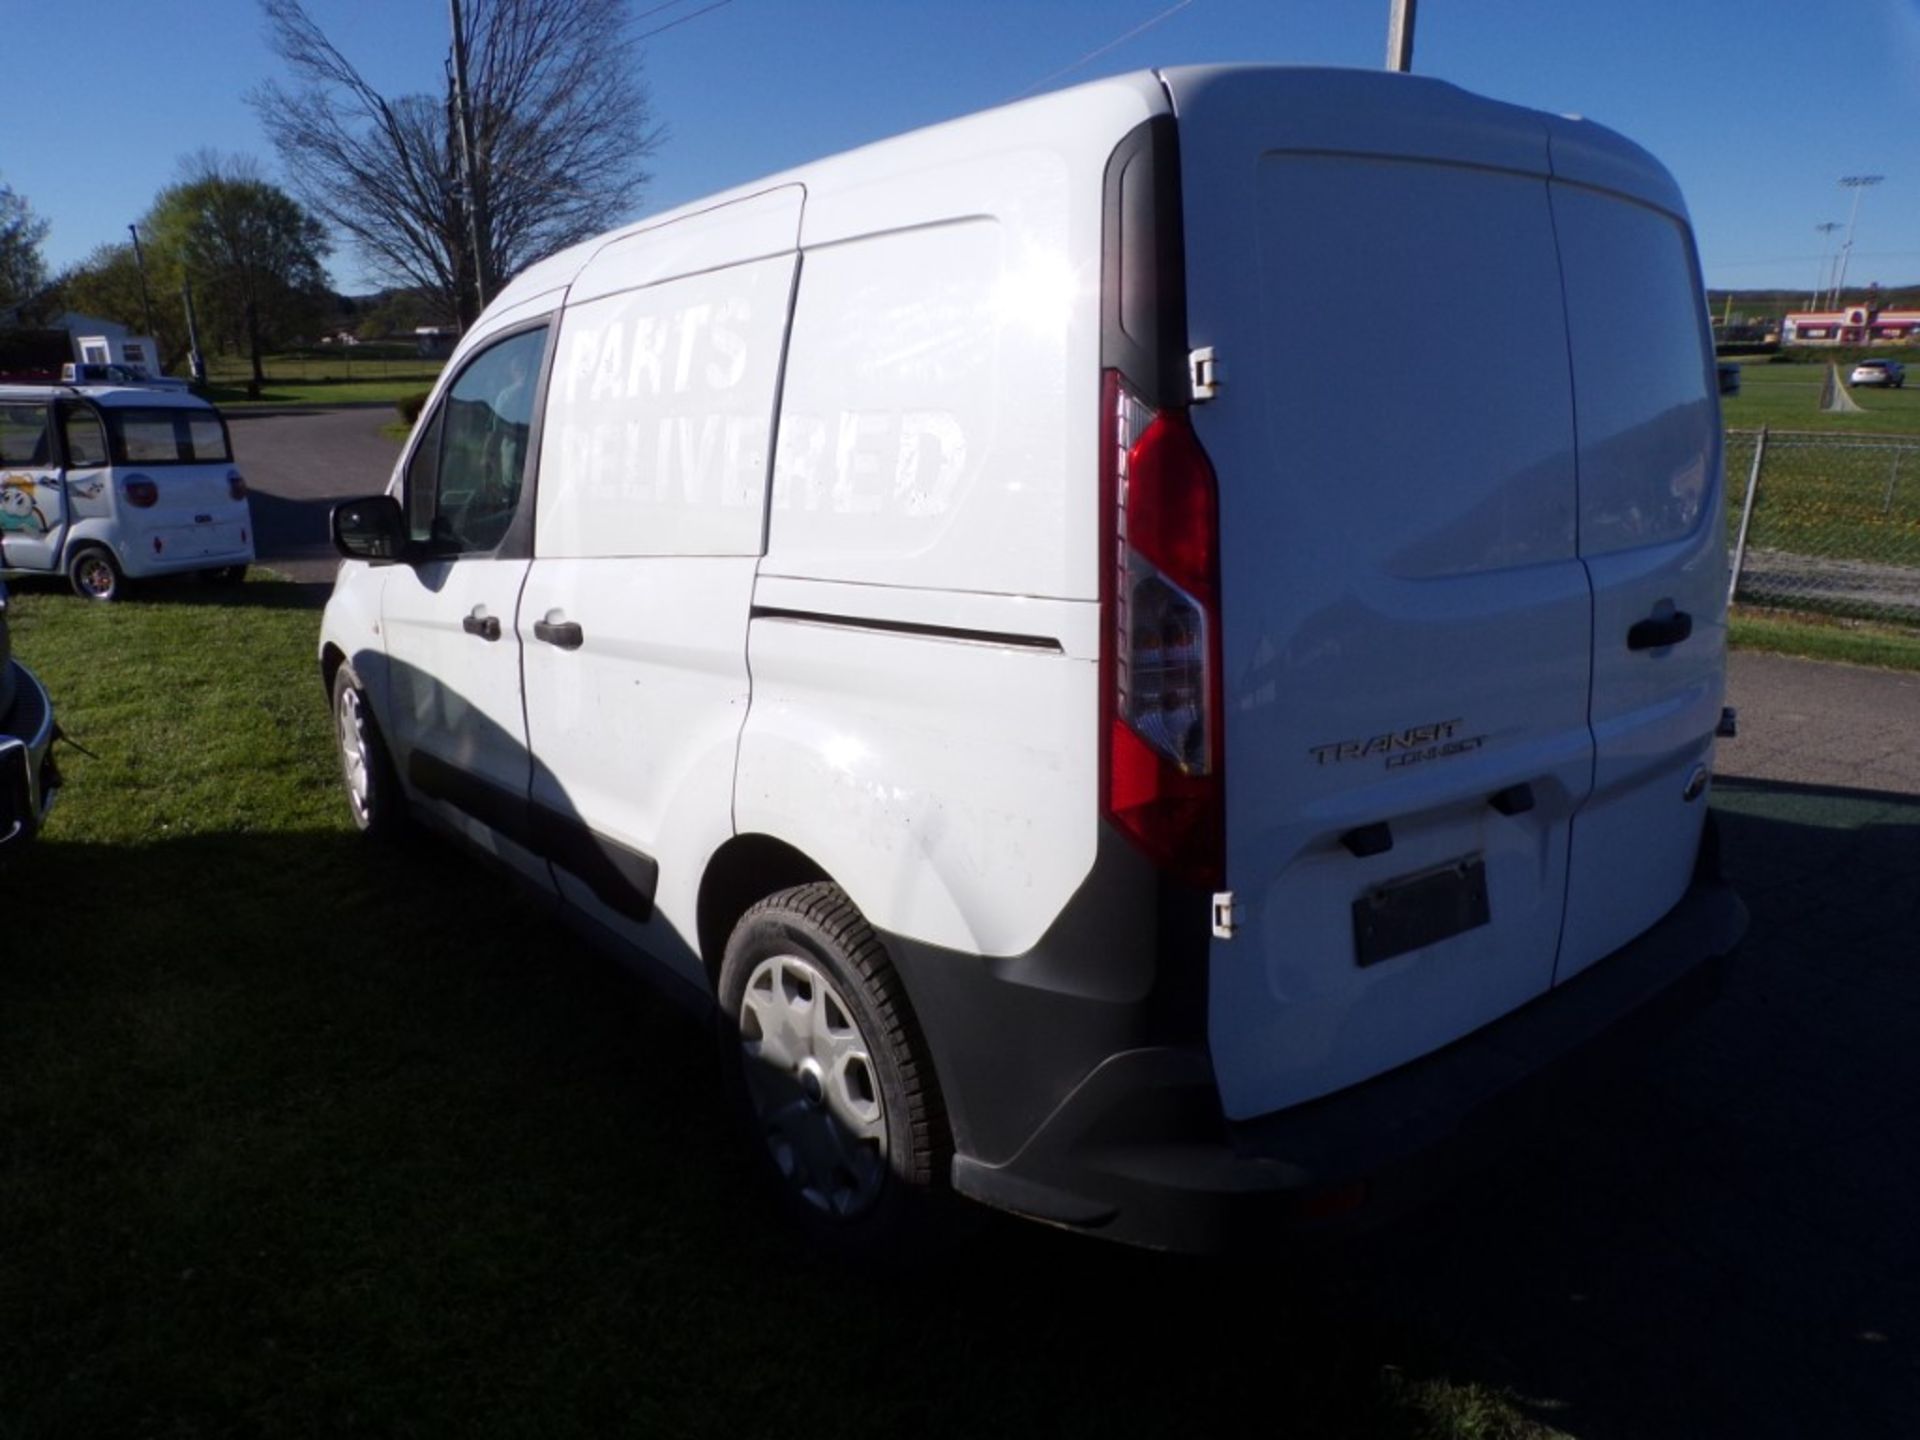 2016 Ford Transit Connect, Auto, White, 208,281 Miles, Vin # NM0LS6E73G1231962 (6561) - HAVE TITLE - Image 3 of 5